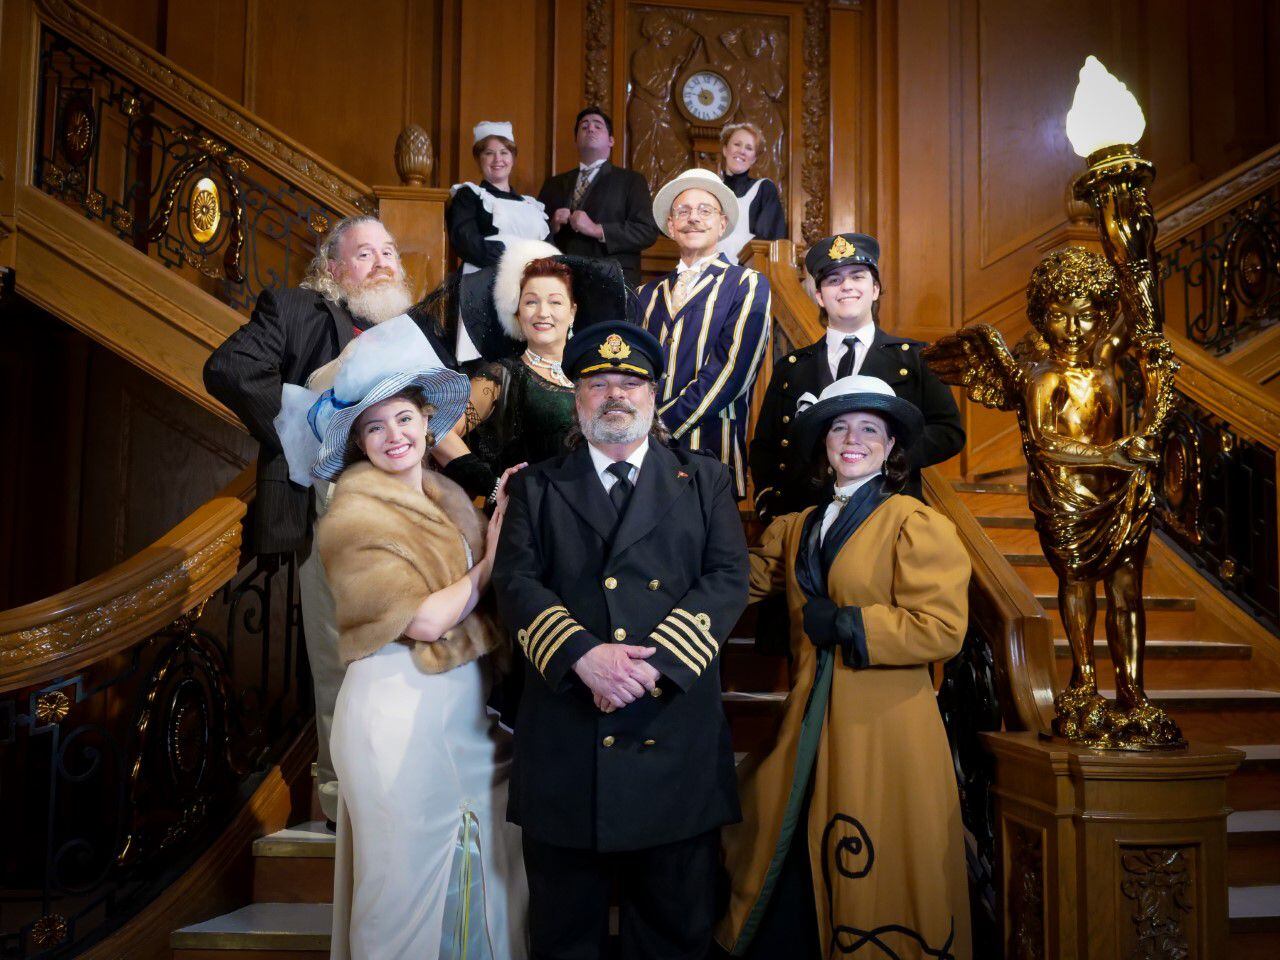 First class dinner gala returning to Titanic: The Artifact Exhibition